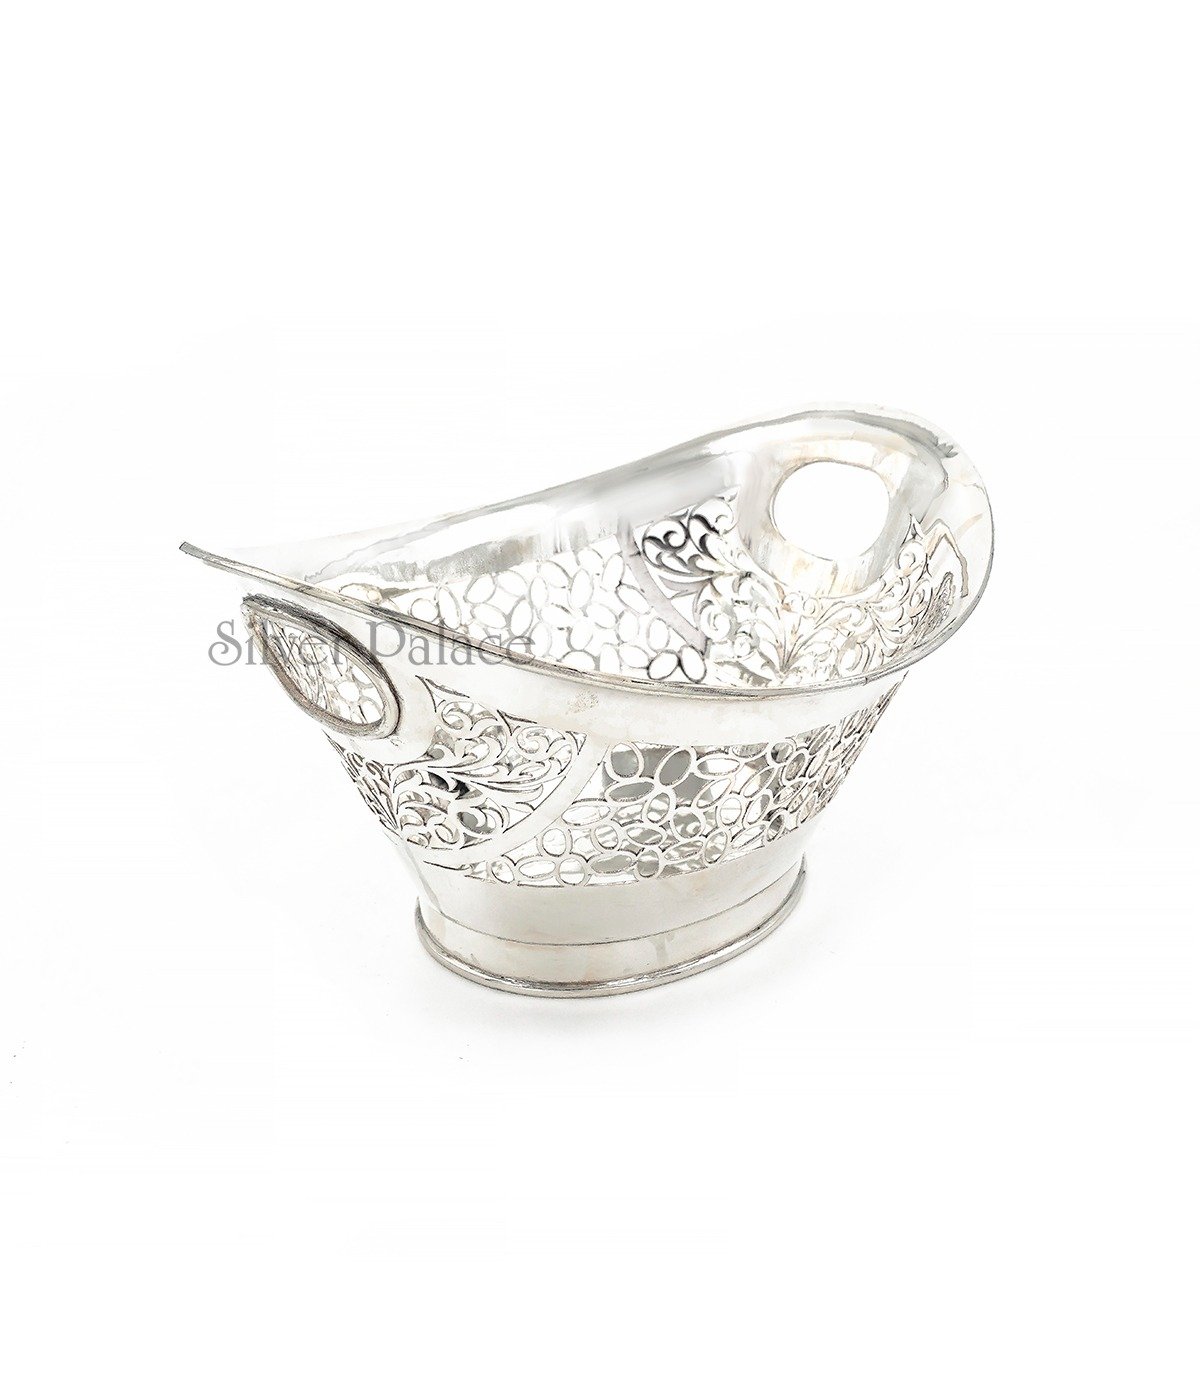 92.5 PURE SILVER FRUIT BOWL FOR DINNING